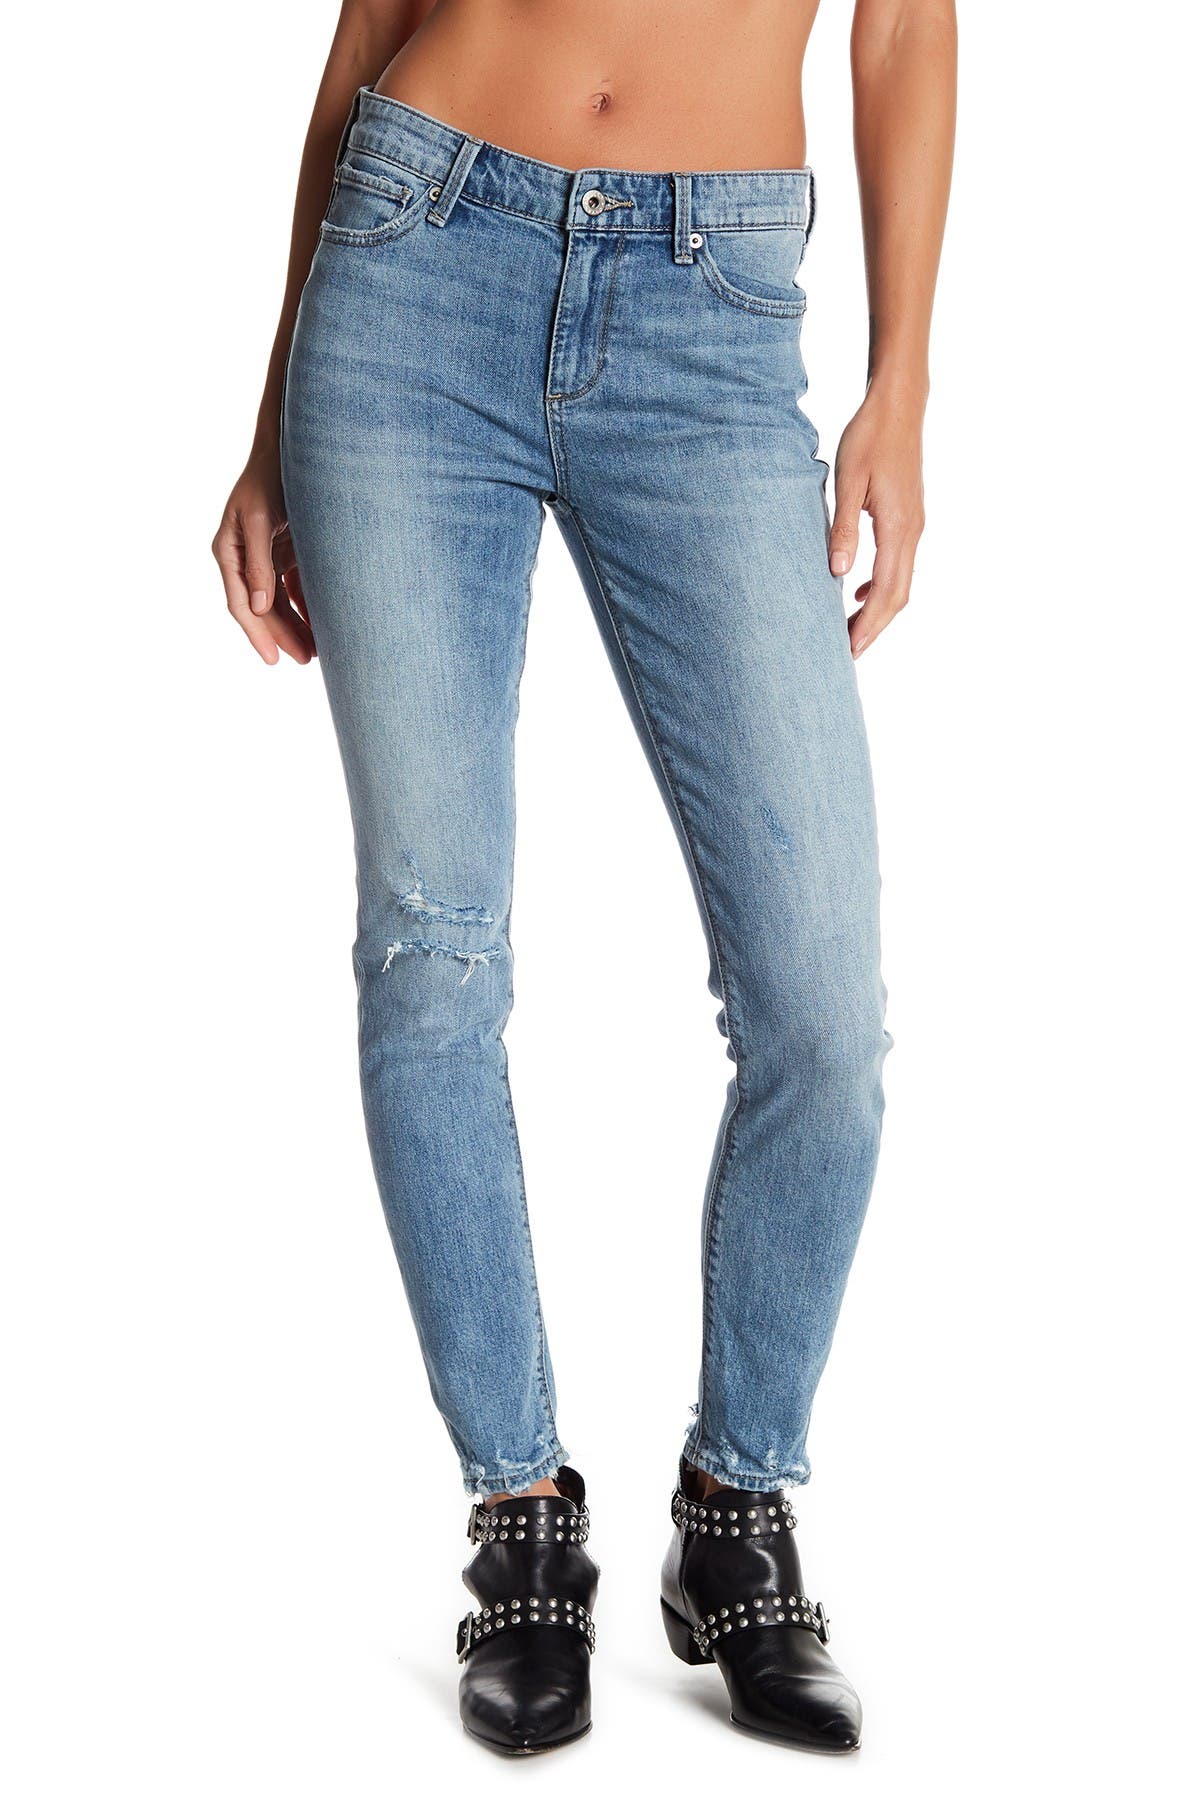 skinny fit mid rise jeans